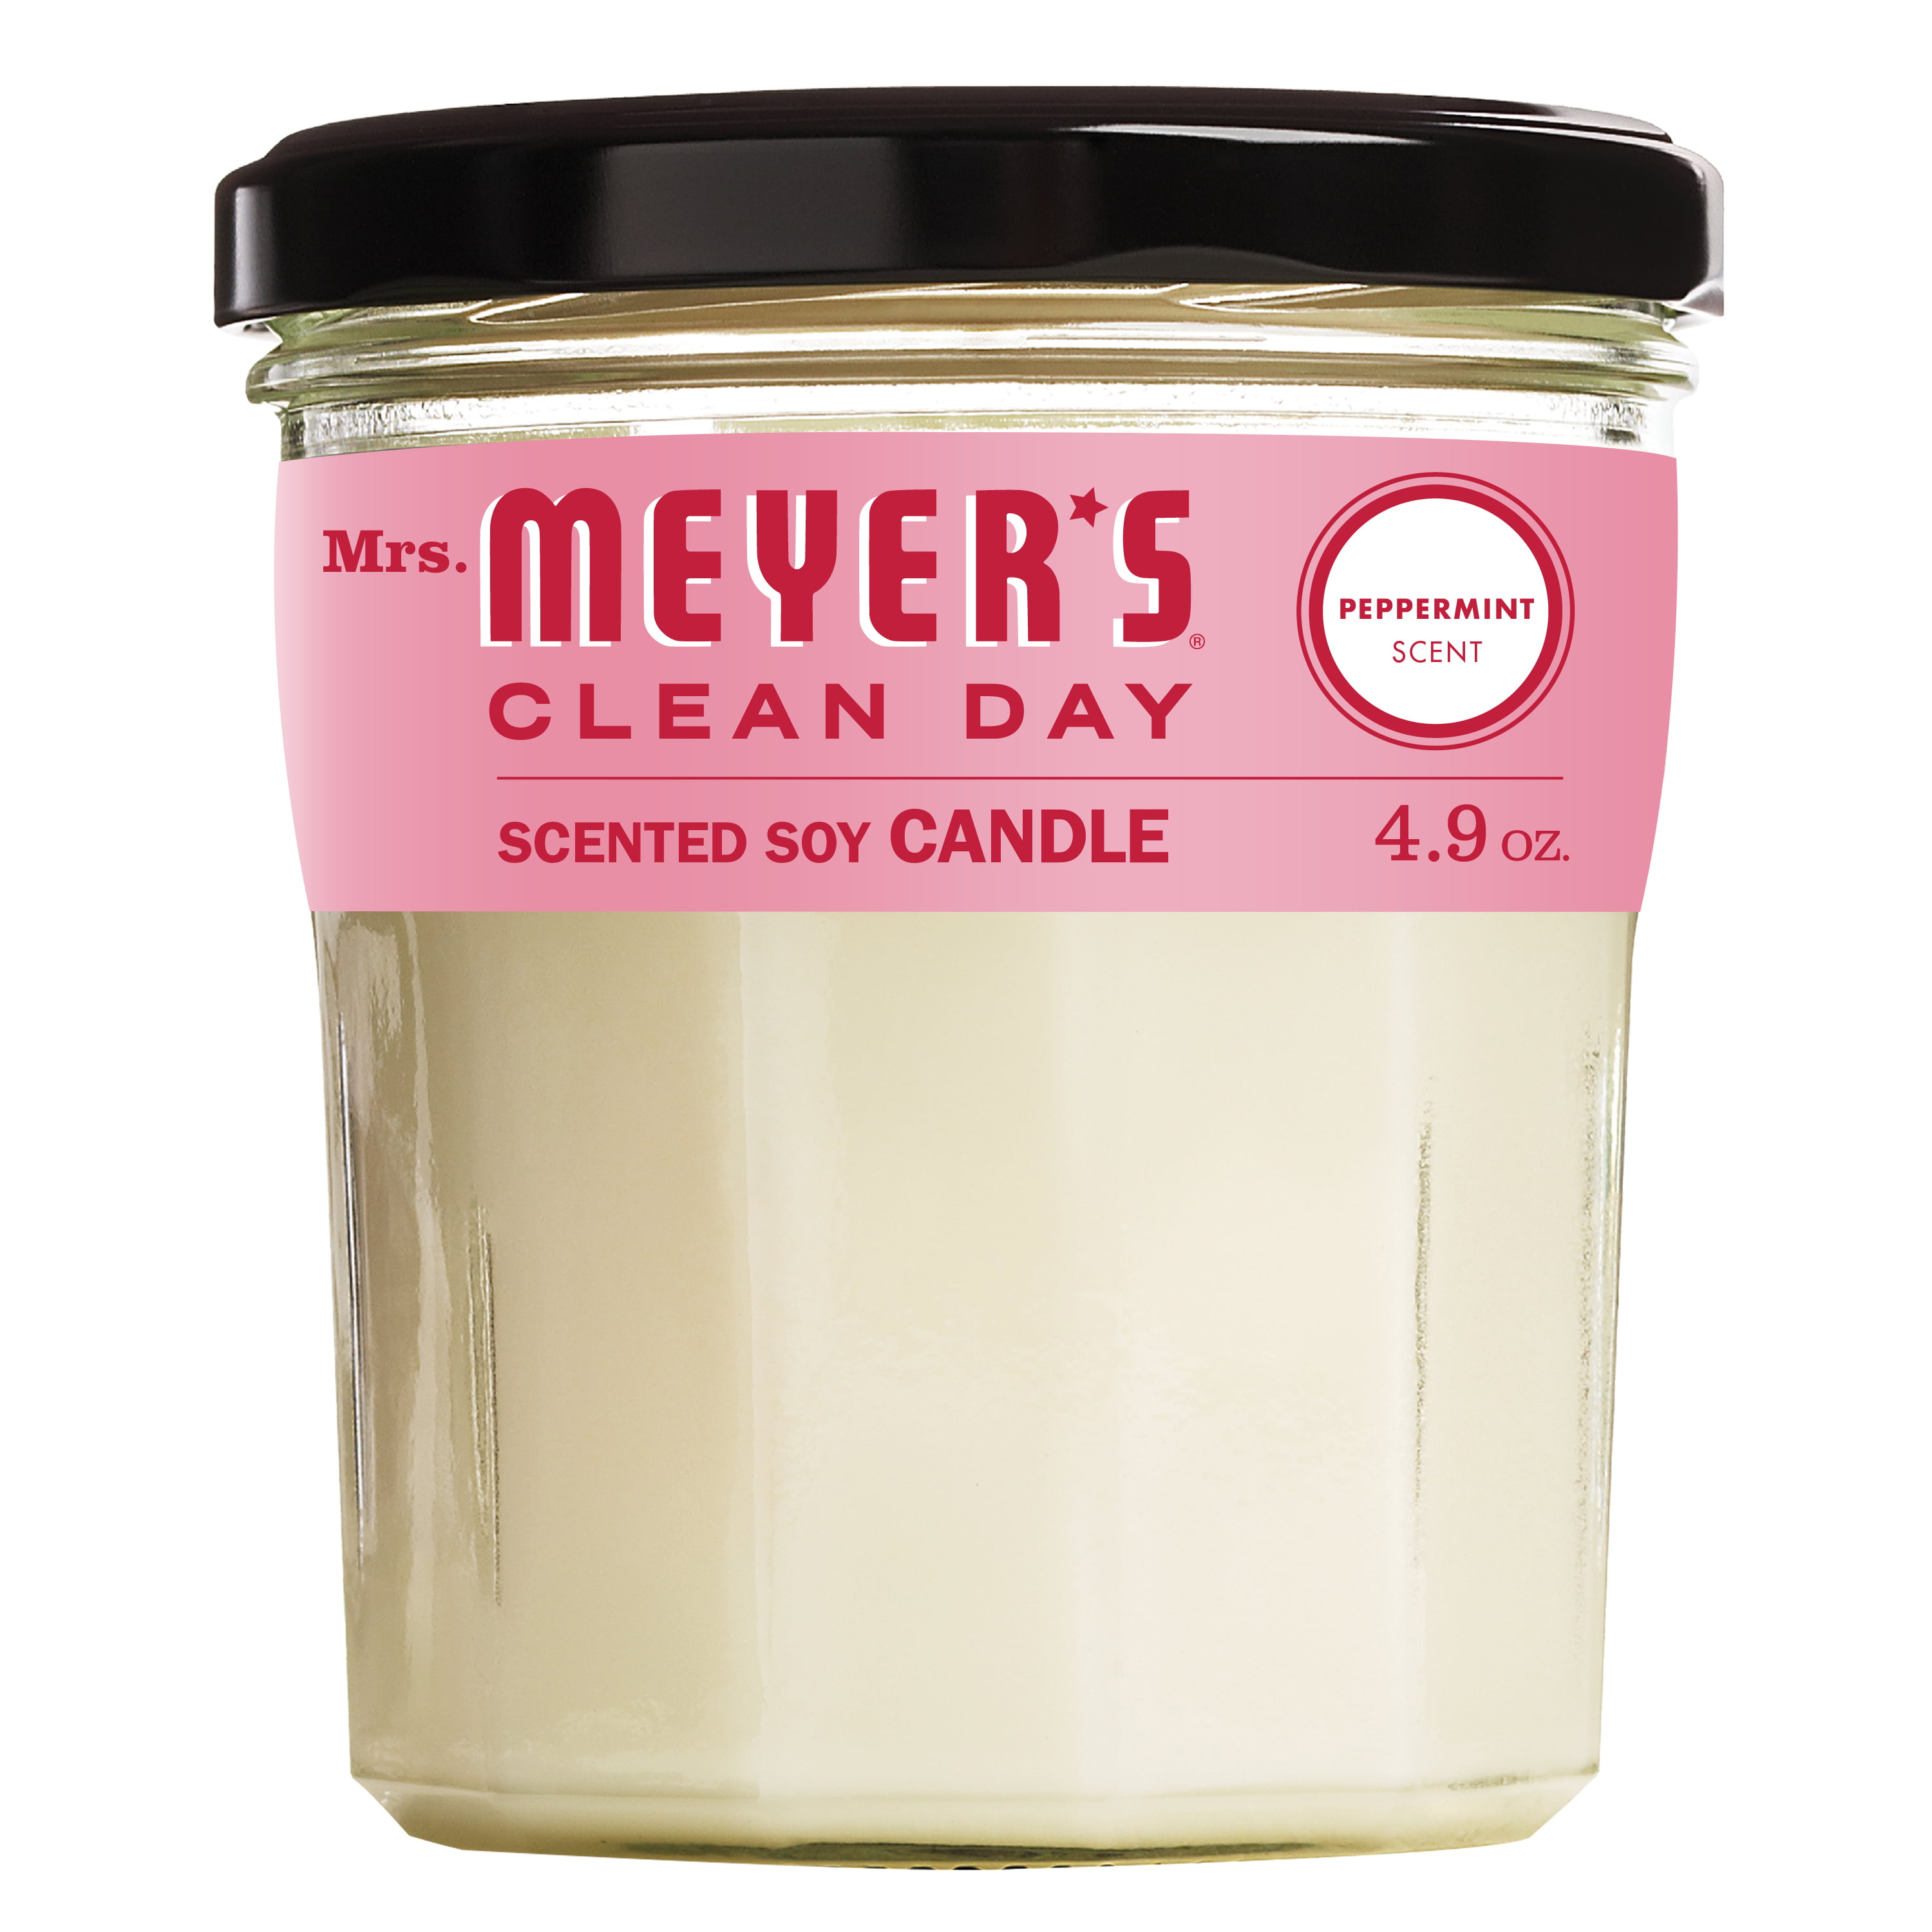 2 MRS MEYER'S CLEAN DAY LIMITED EDITION MUM SCENTED SCENTED SOY CANDLE 4.9 OZ 